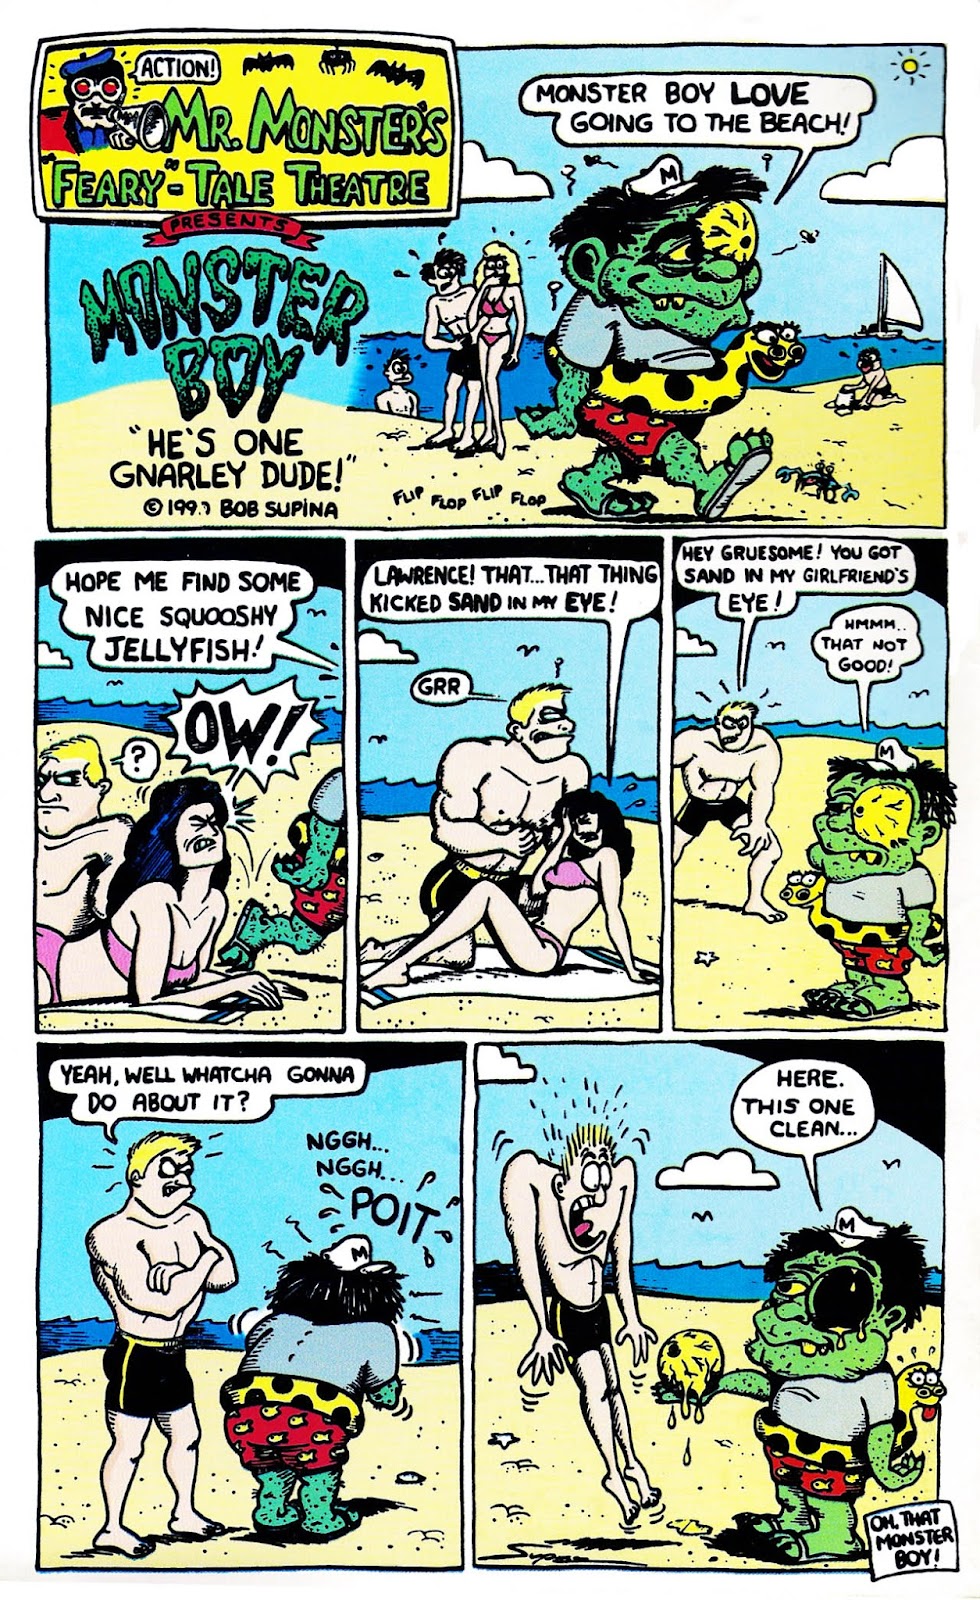 Mr. Monster Presents: (crack-a-boom) issue 2 - Page 36